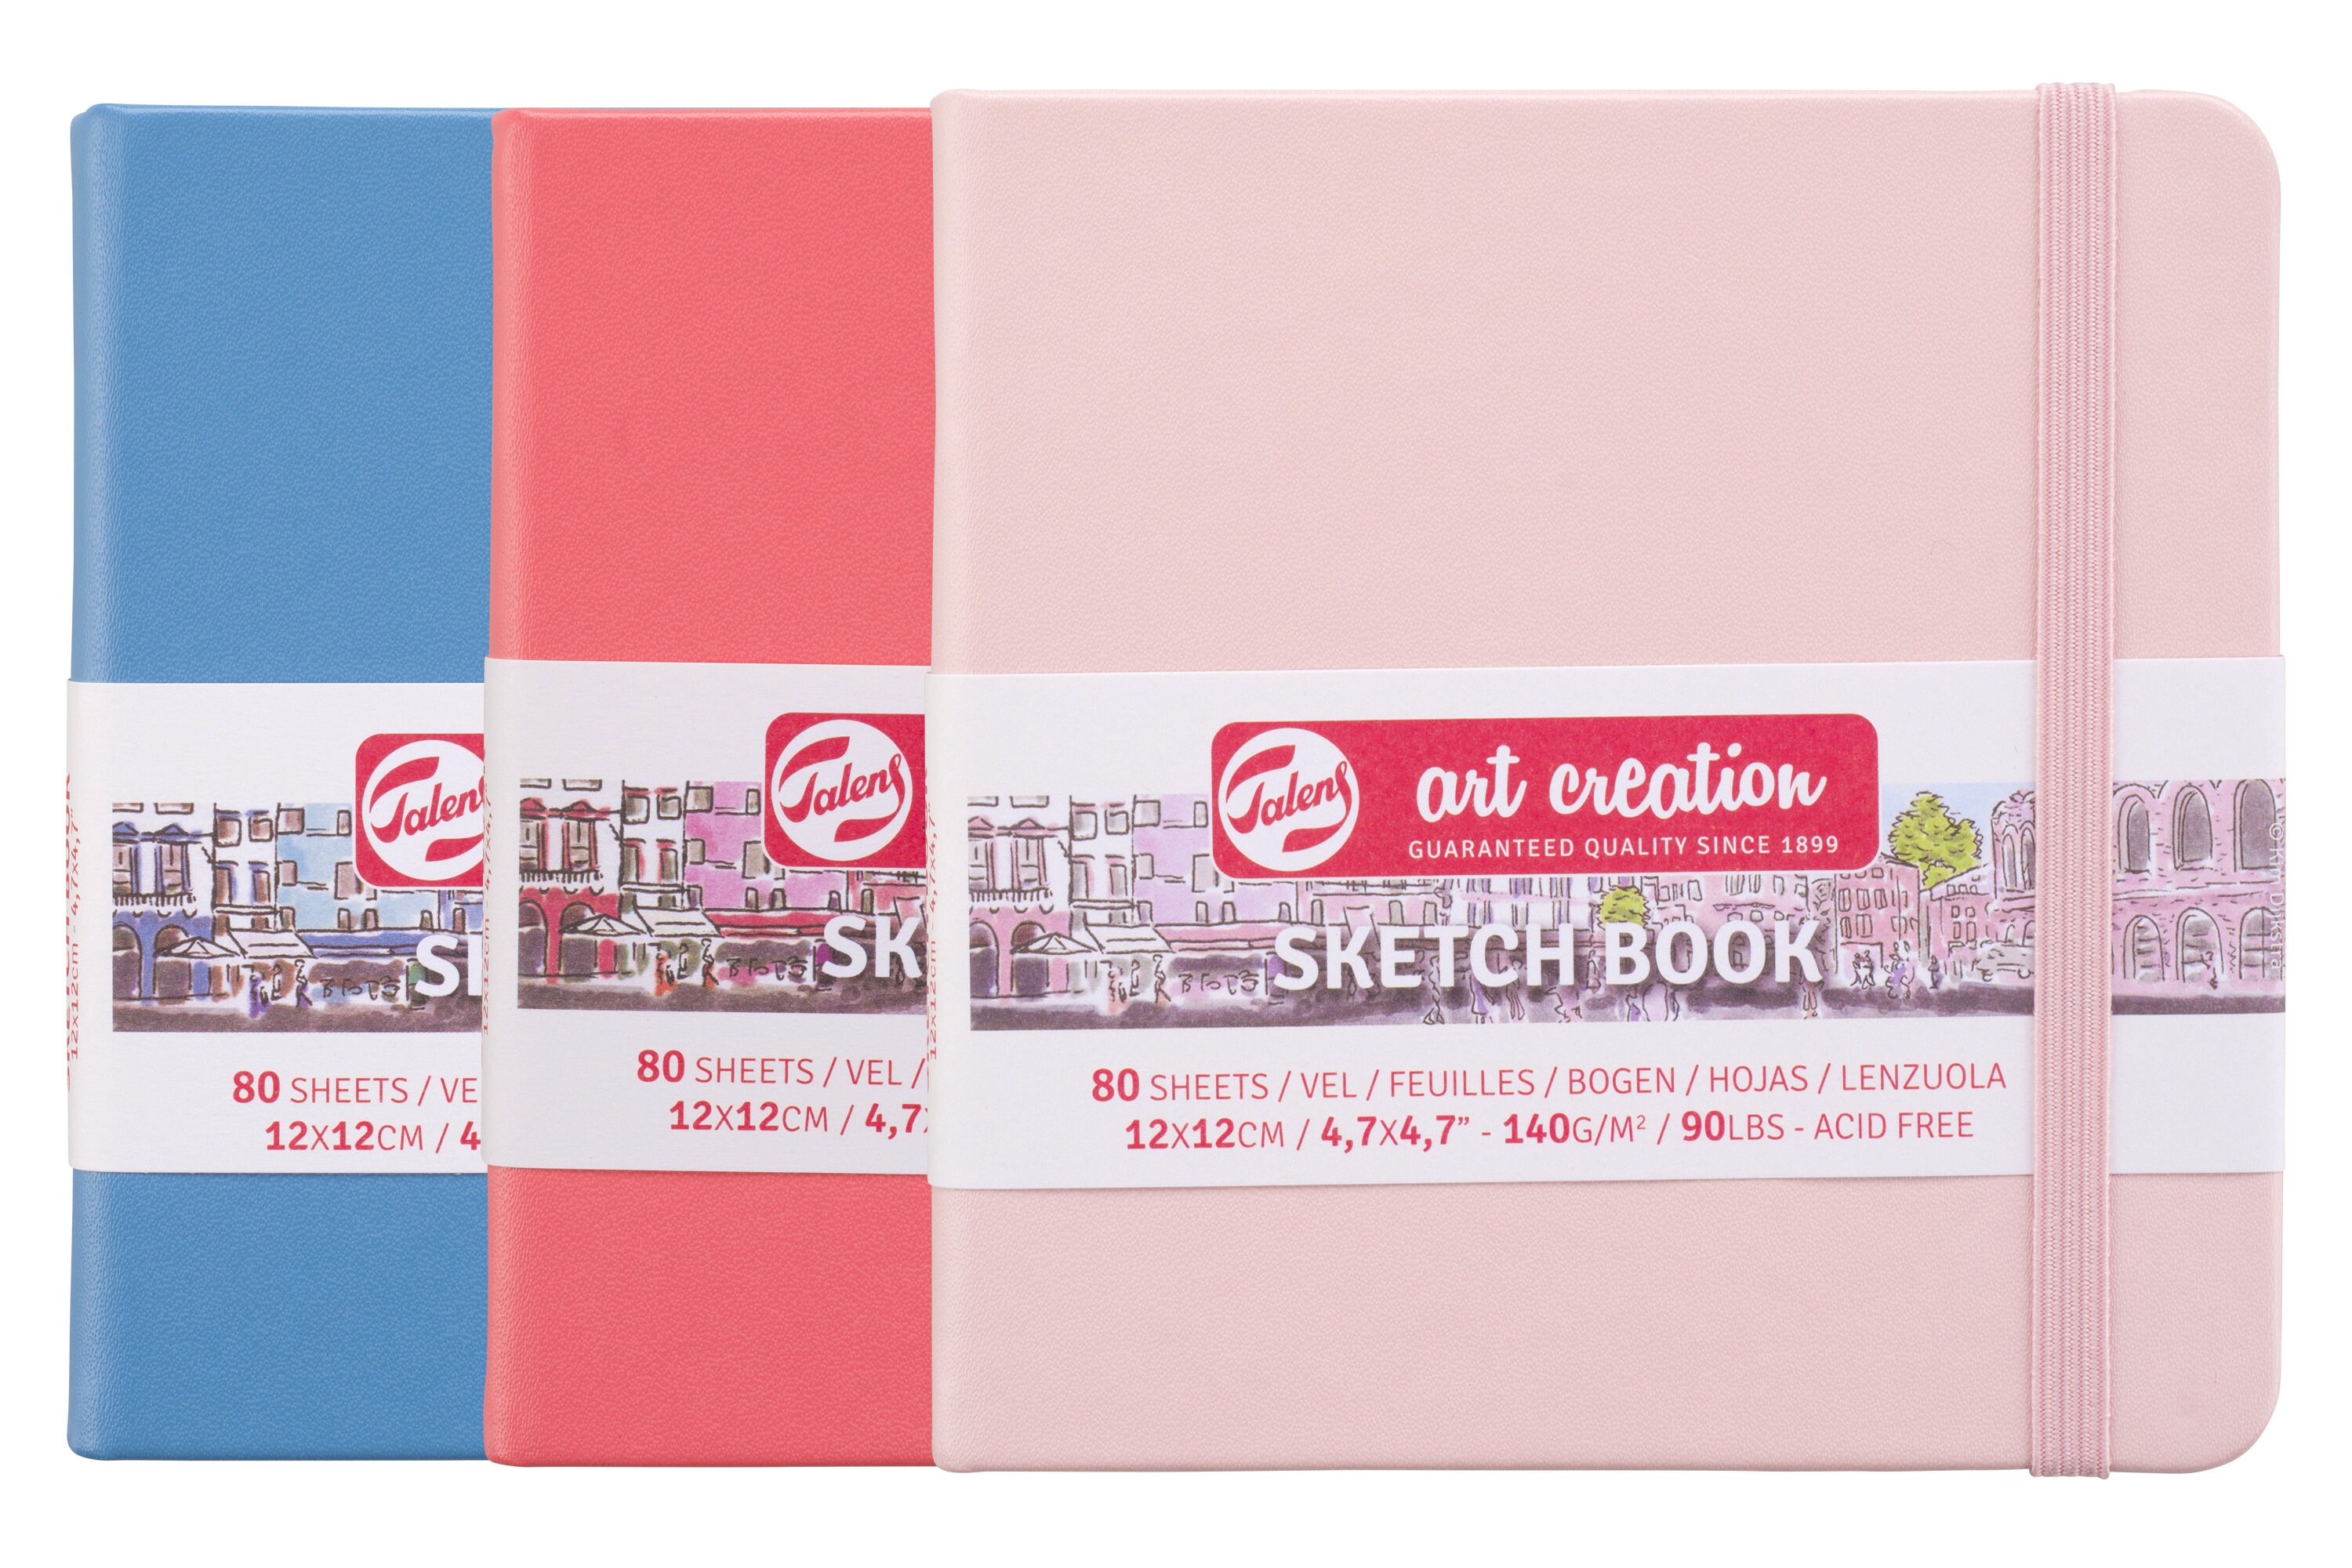 Talens Art Creations Sketchbook - Coral Red, 8.3 x 5.1